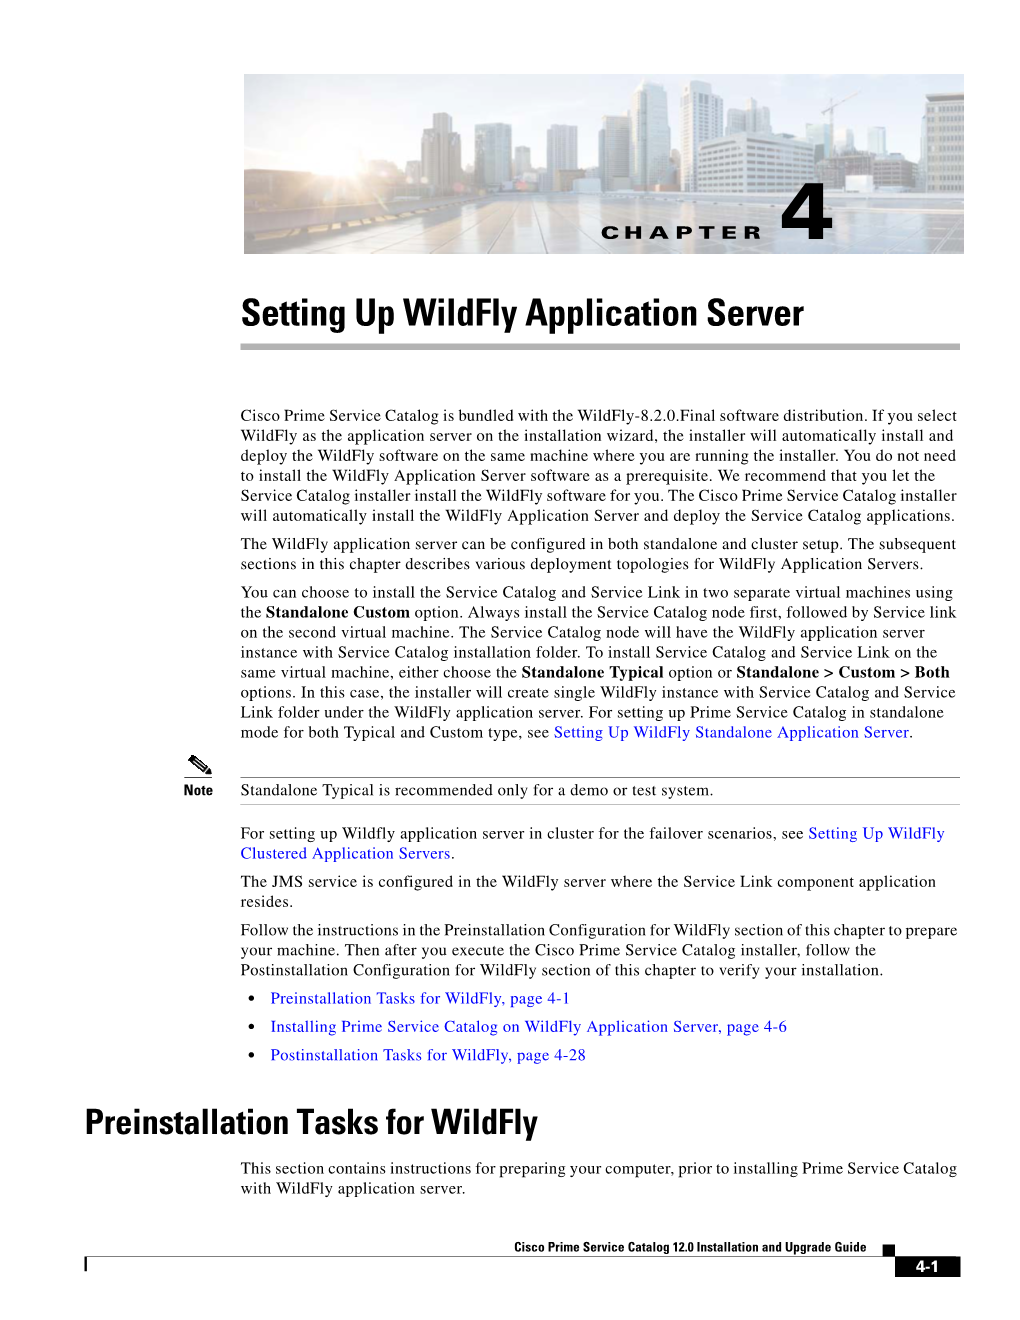 Installation on Wildfly Application Server